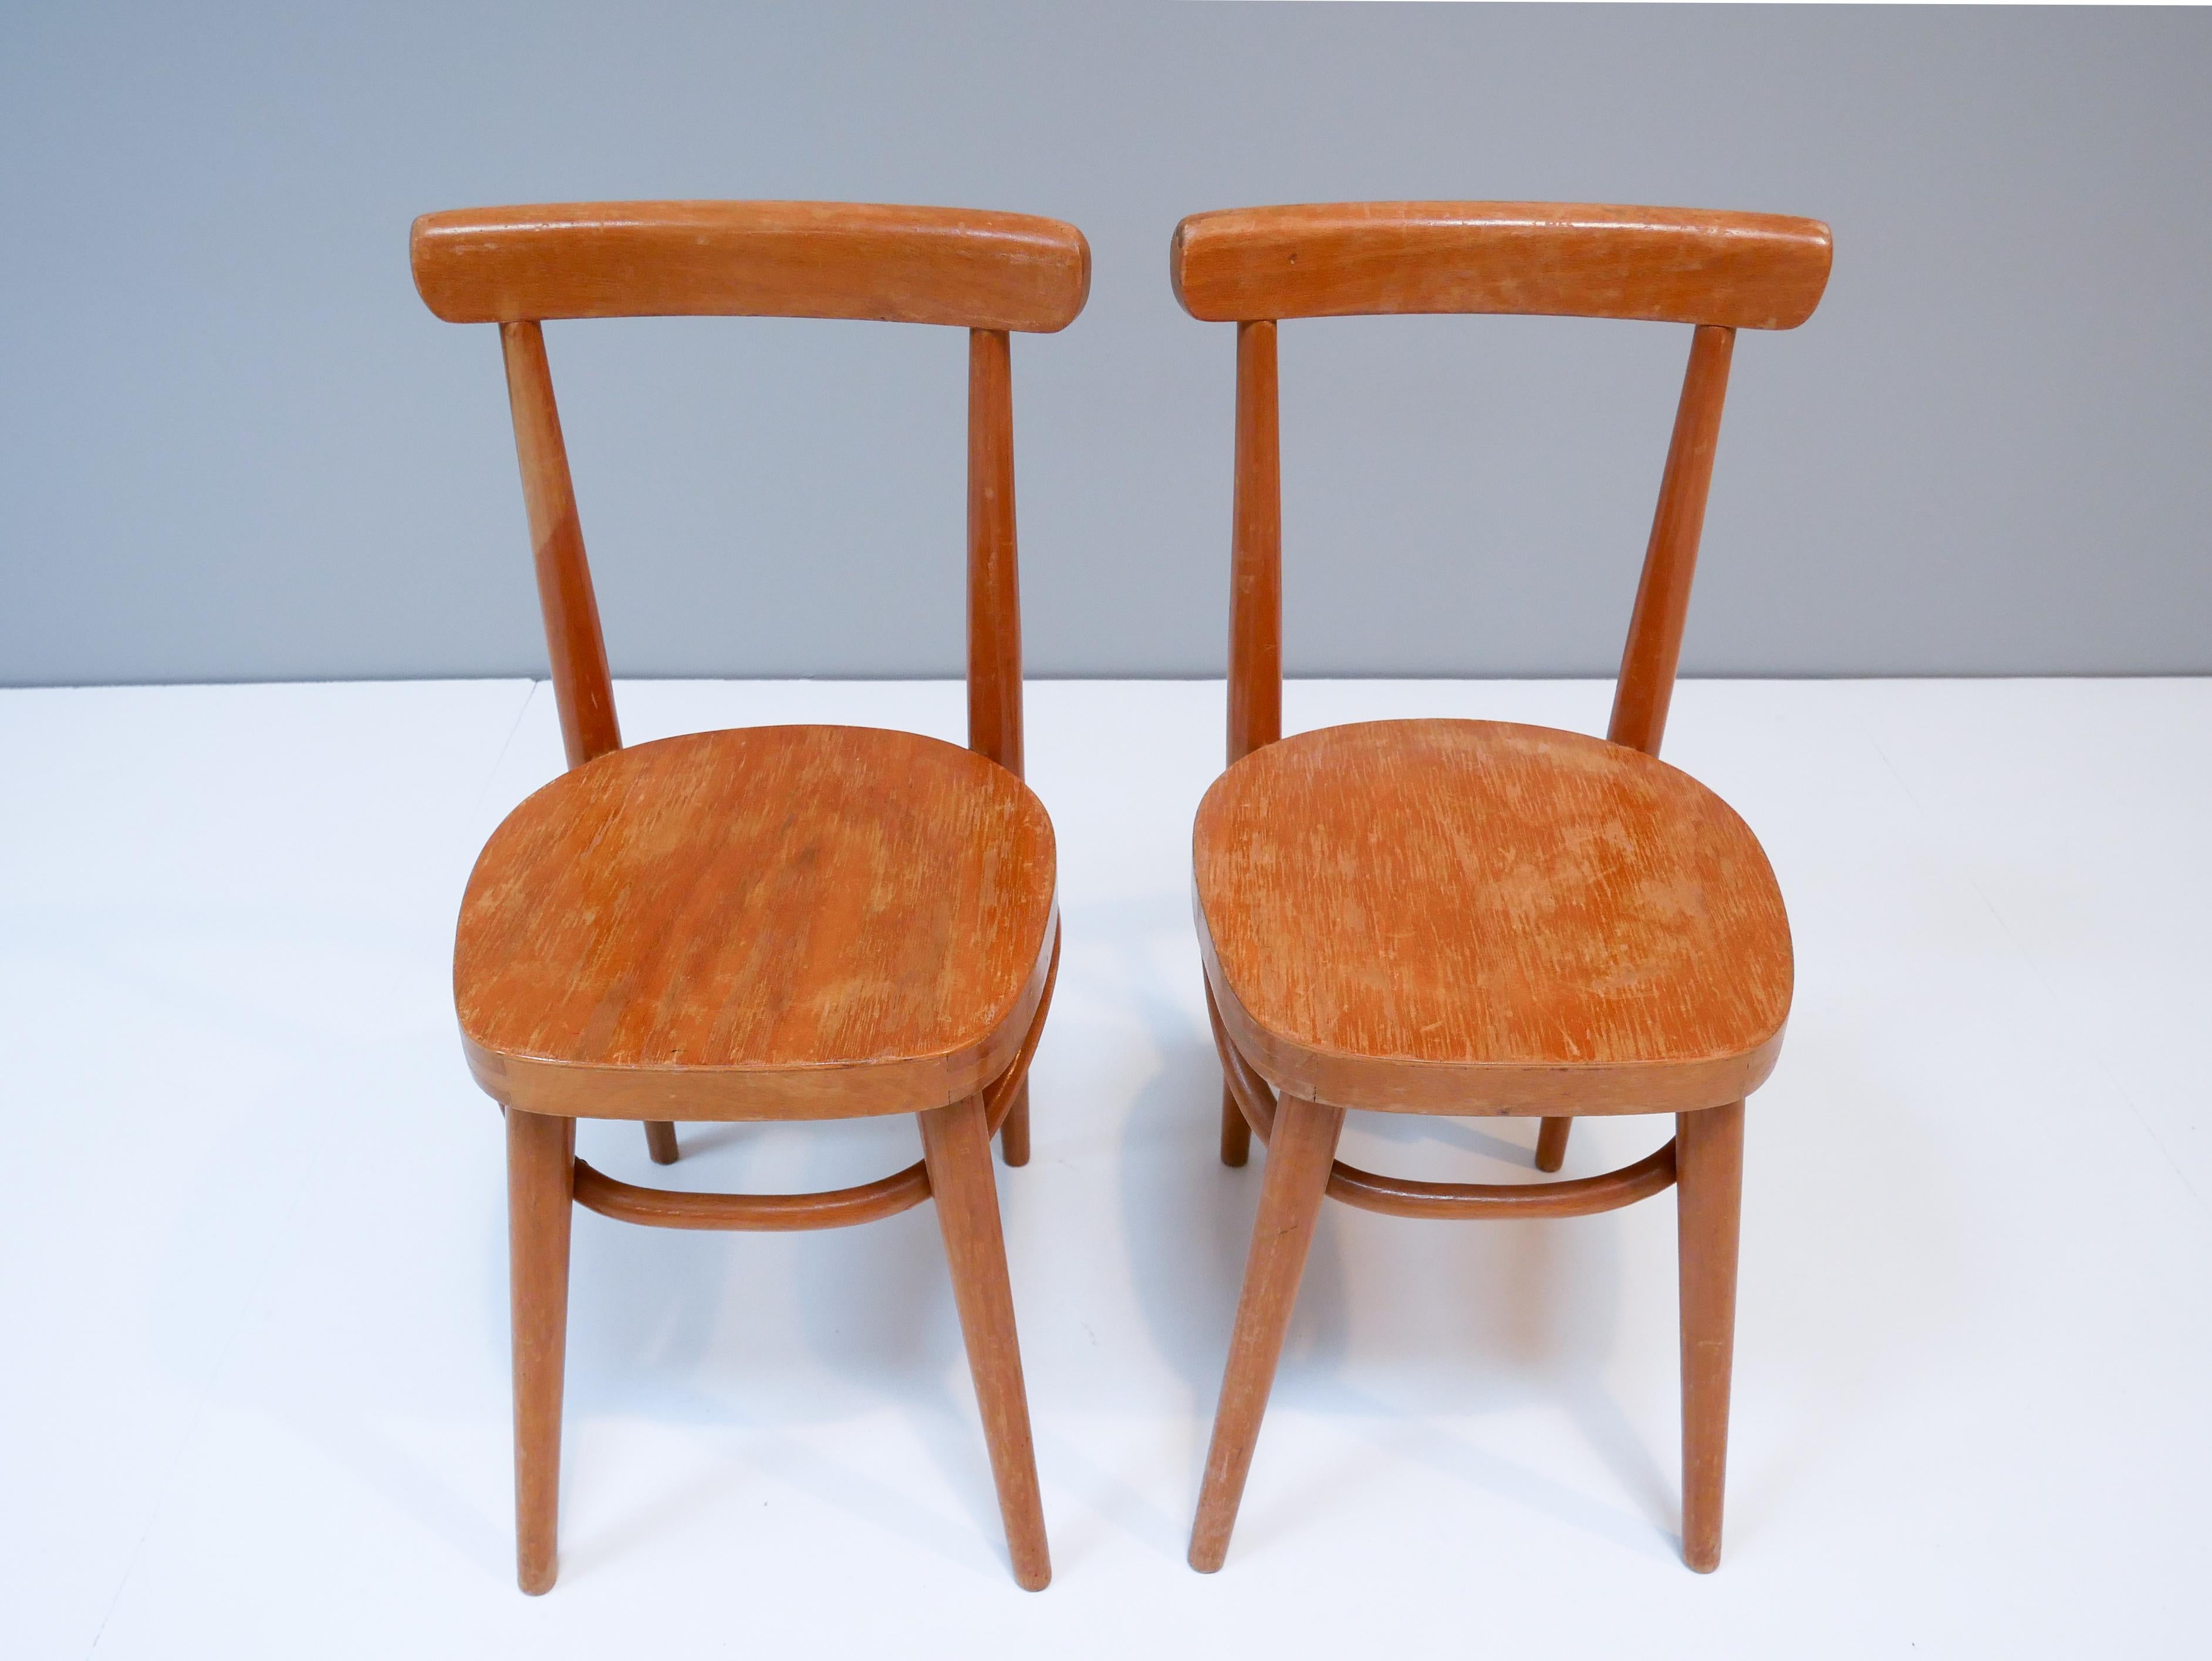 Birch Thonet Style Children's Bentwood Chairs, 1950s, Sweden For Sale